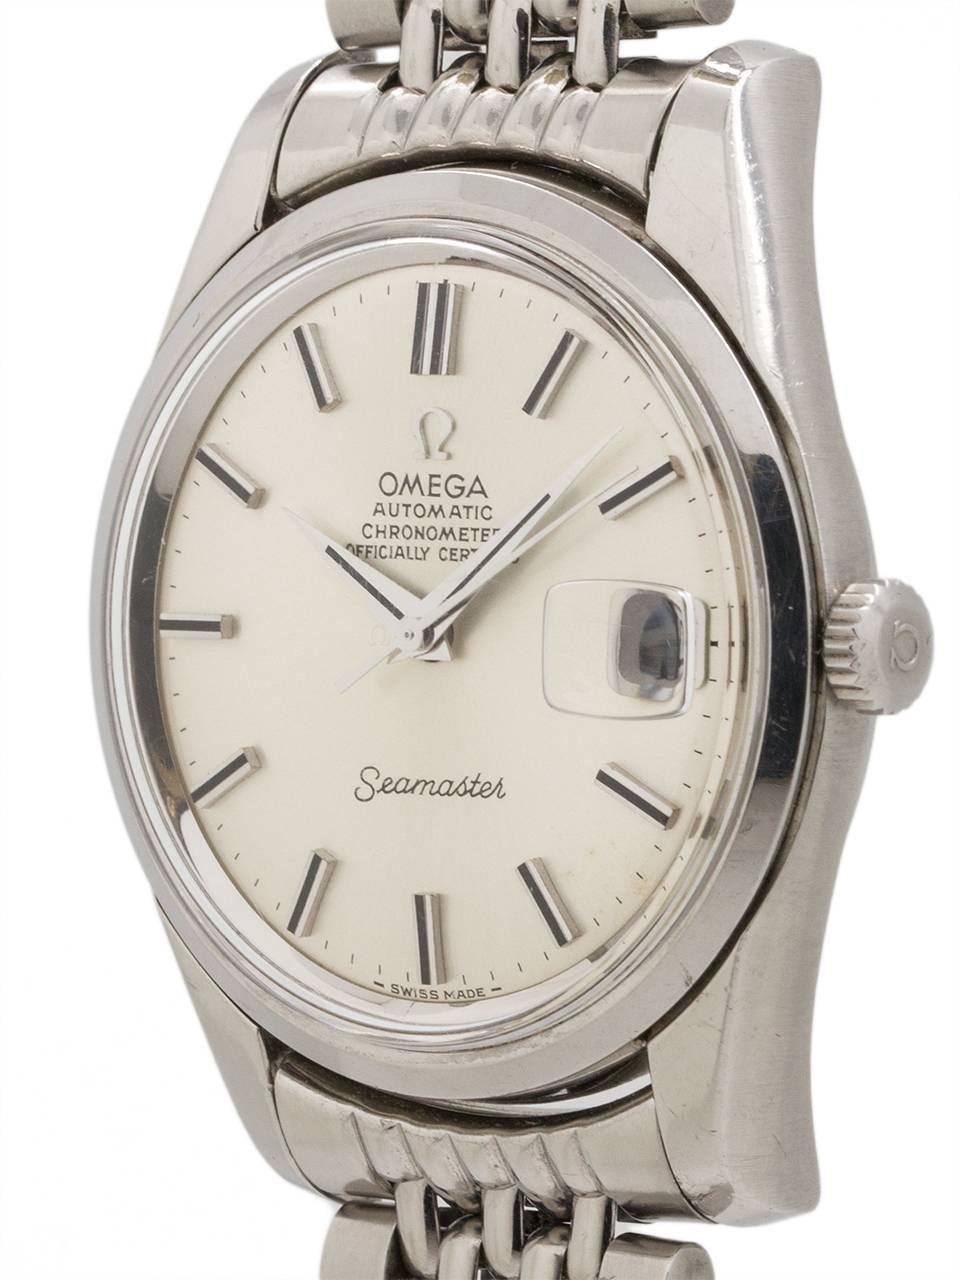 
Introduced in 1948, the Omega Seamaster has been produced in countless different styles and configurations. This particular Seamaster ref# 166.010 with movement serial # 30 million circa 1969 is a very interesting example distinguished by the